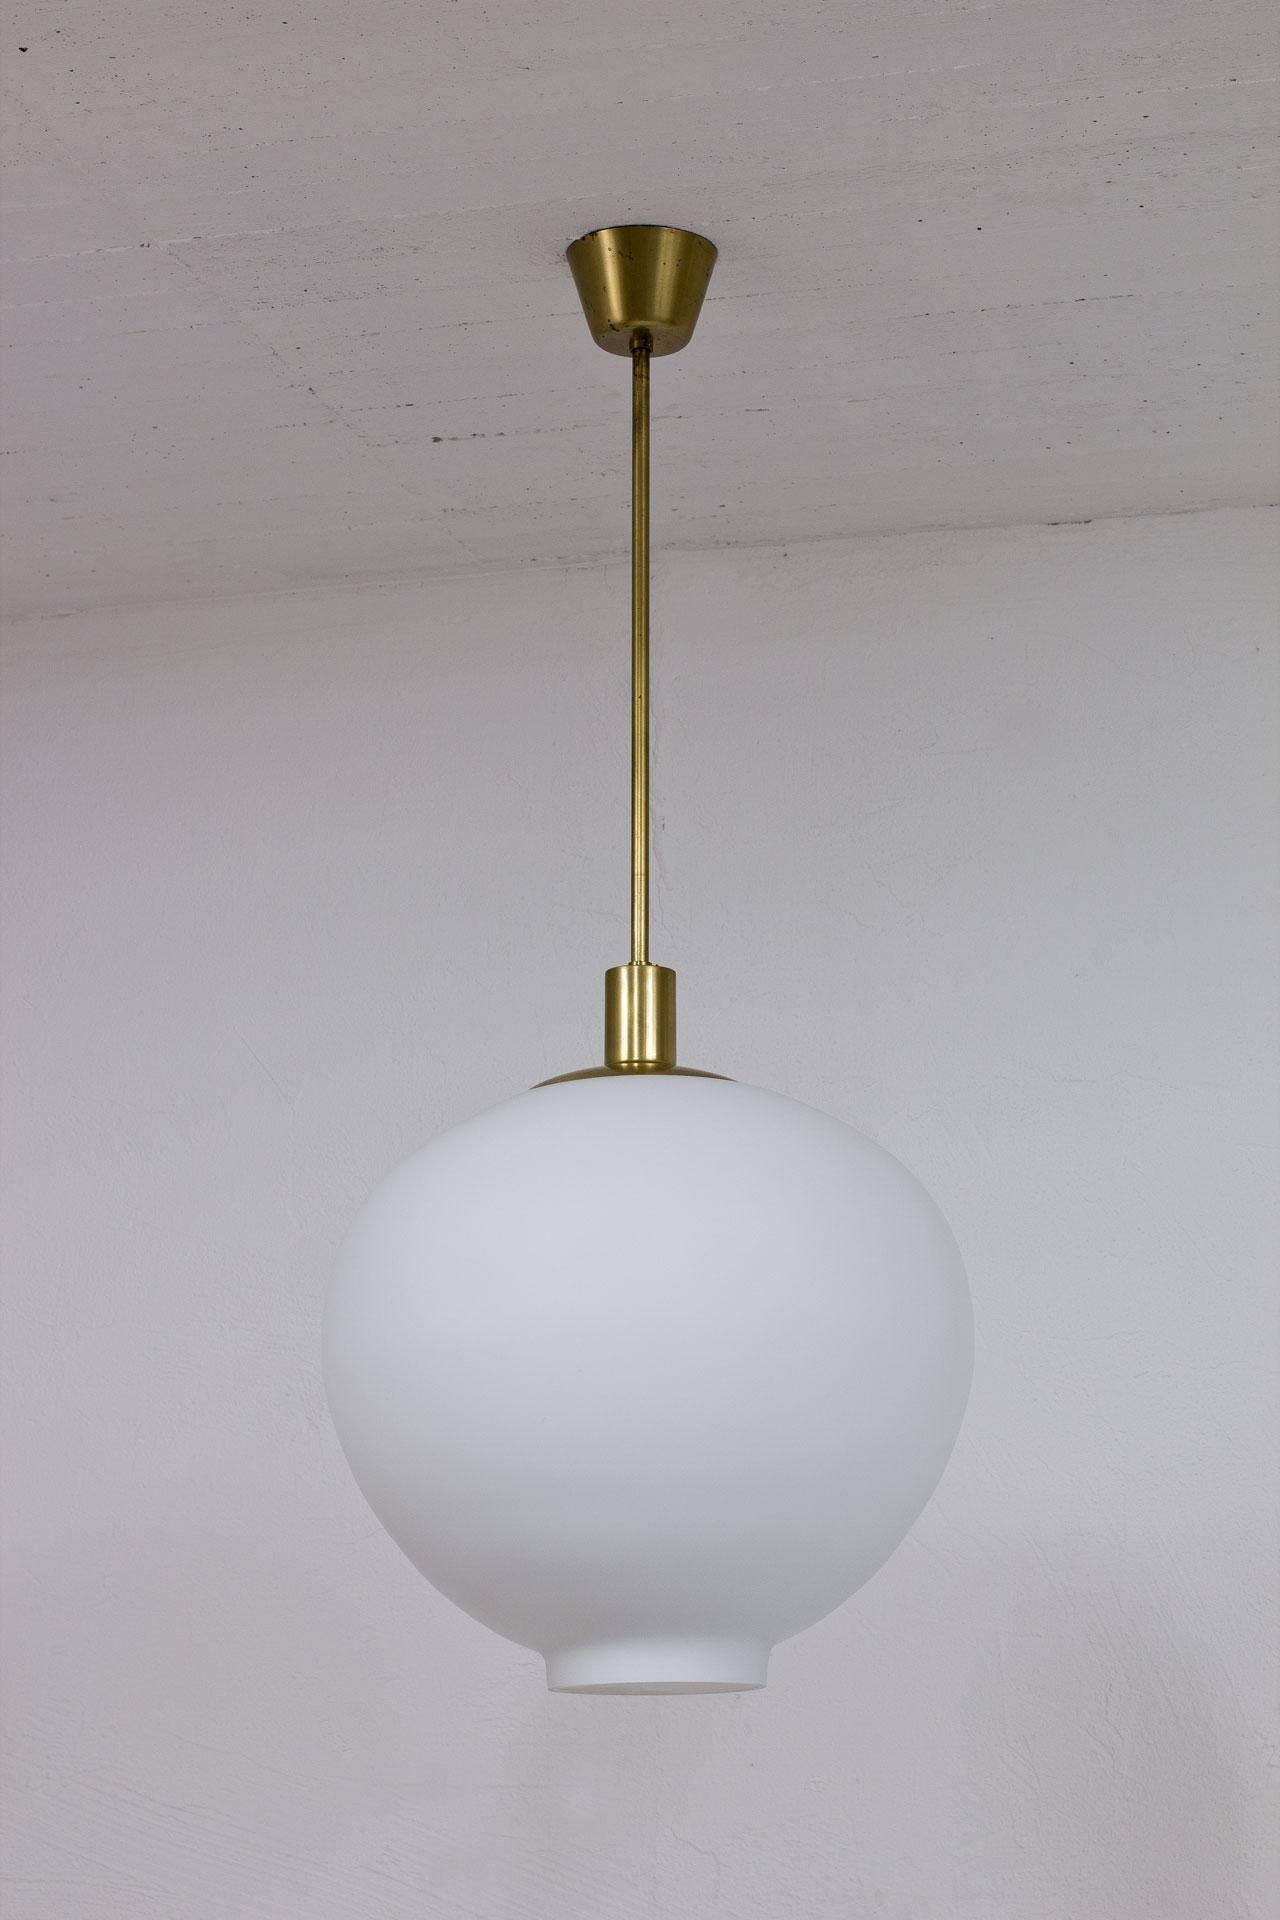 Large ceiling lamp design attributed to Uno Westerberg for Böhlmarks. 
Manufactured in Sweden during the late 1940s (design from 1946).
Opaline glass diffuser with matte brass fittings.
New wiring.